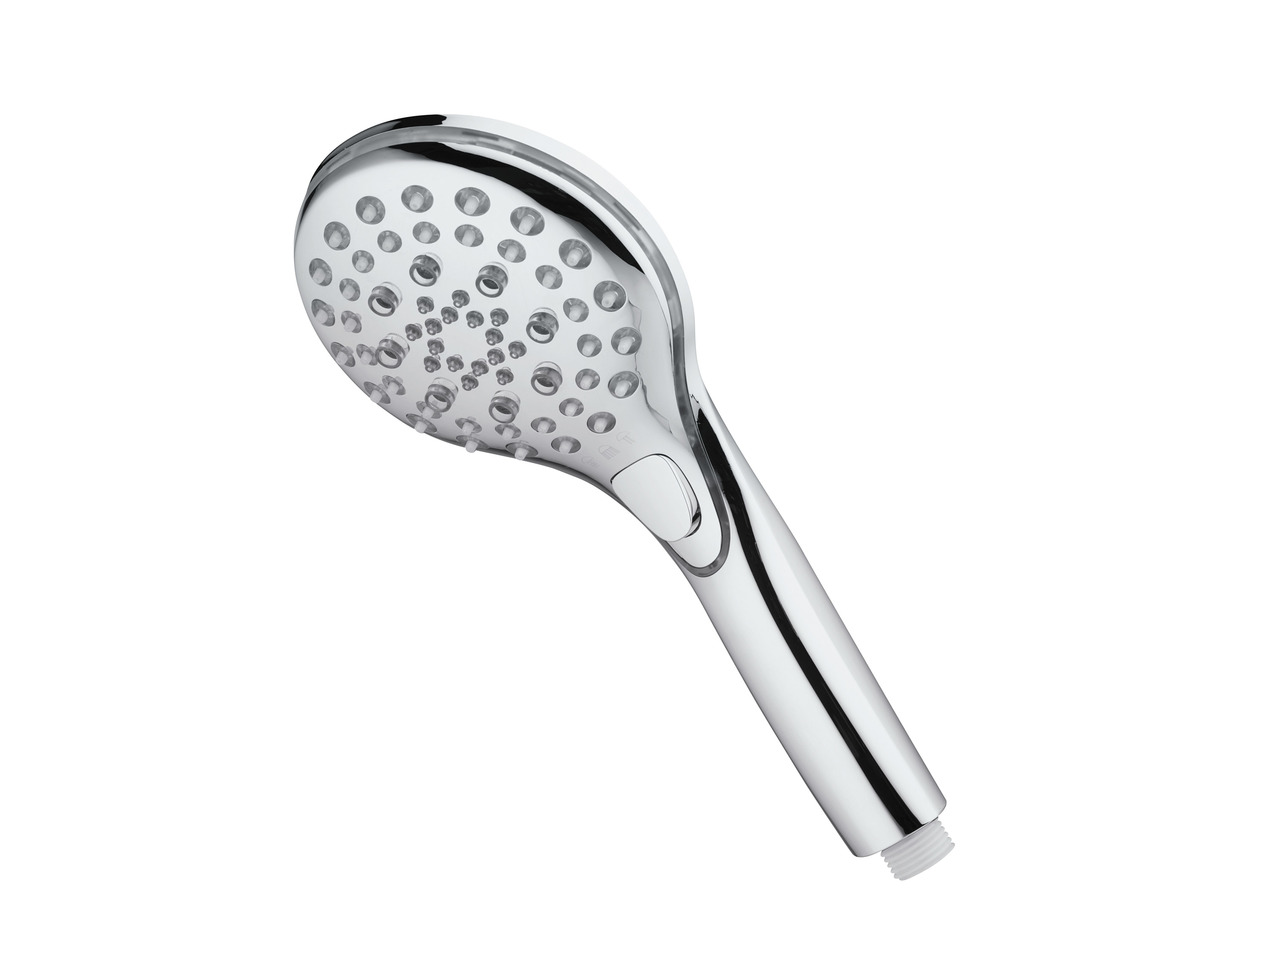 Miomare LED Colour-changing Shower Head1